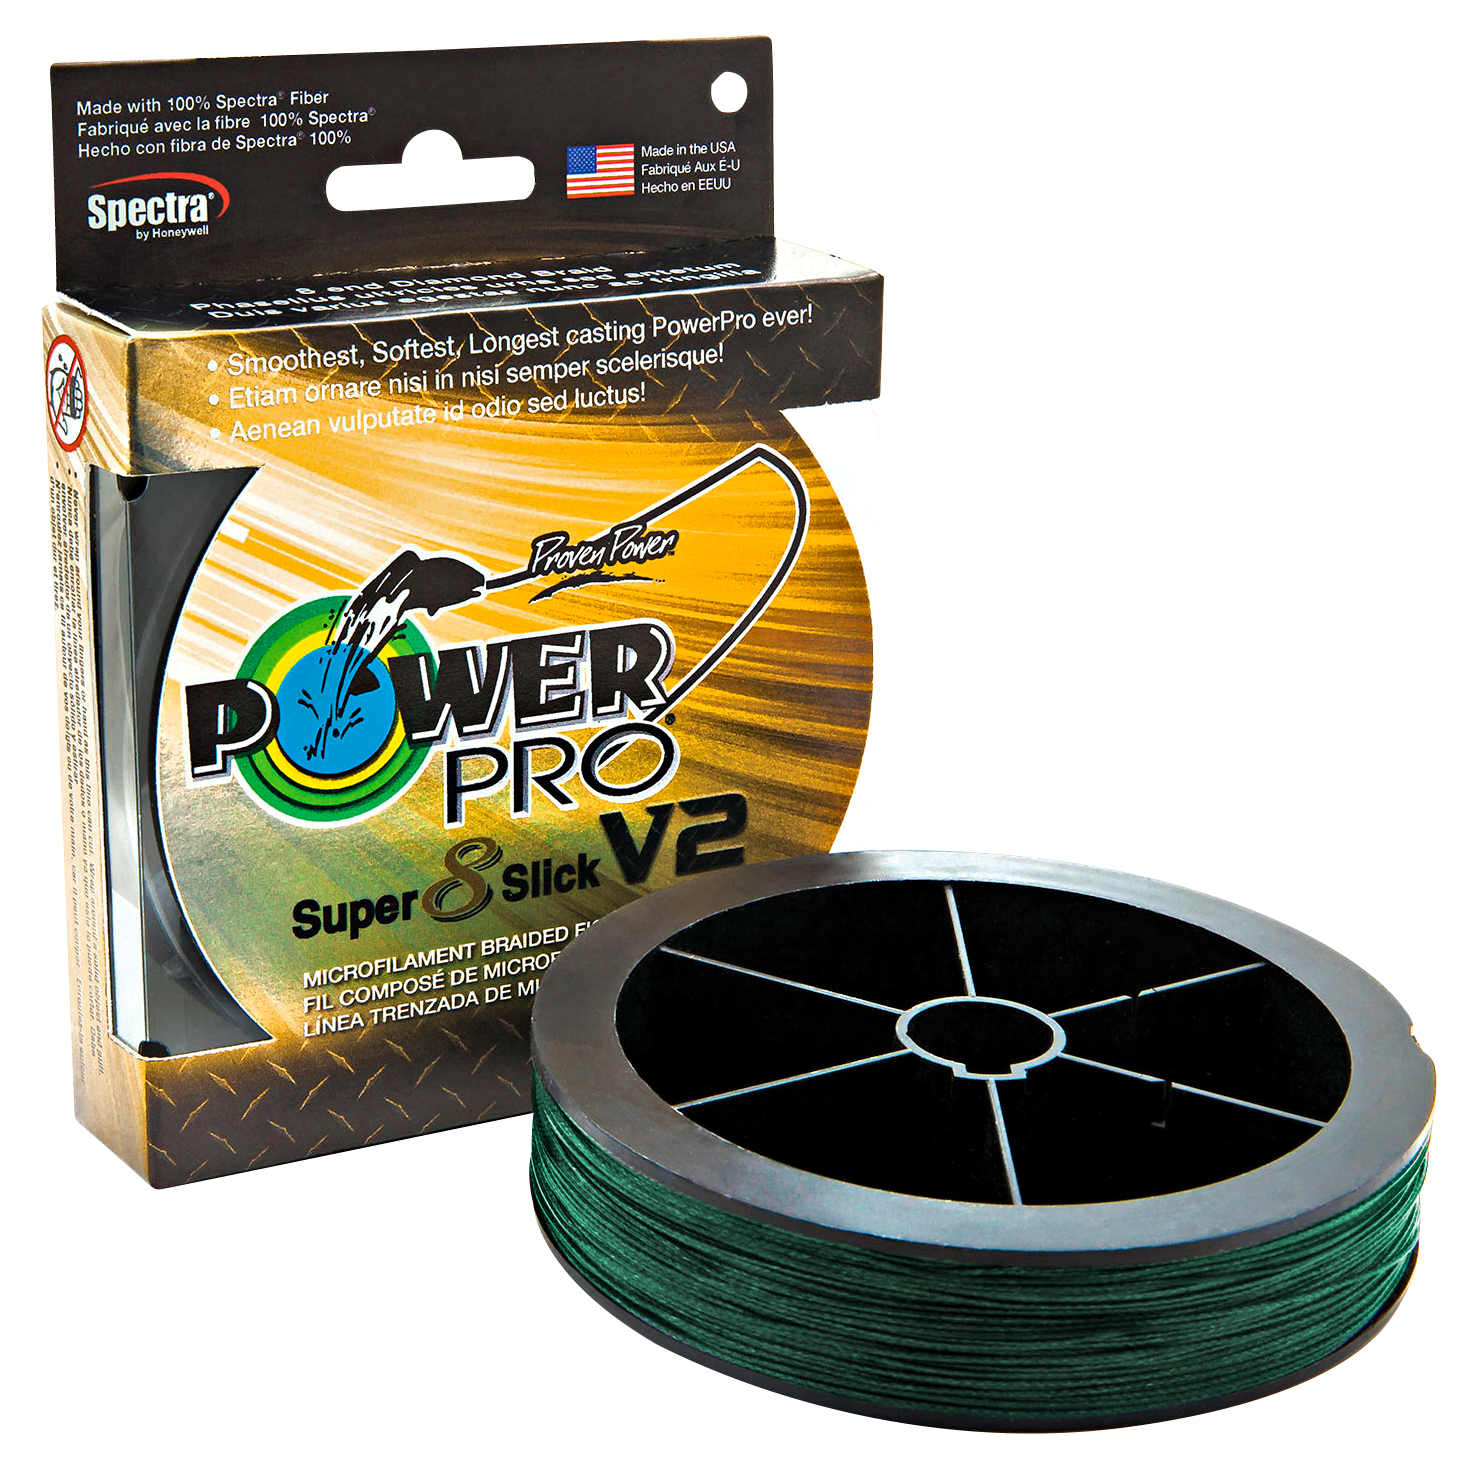 Power Pro Fishing Line Super 8 Slick V2 (moss green, 135 m) at low prices